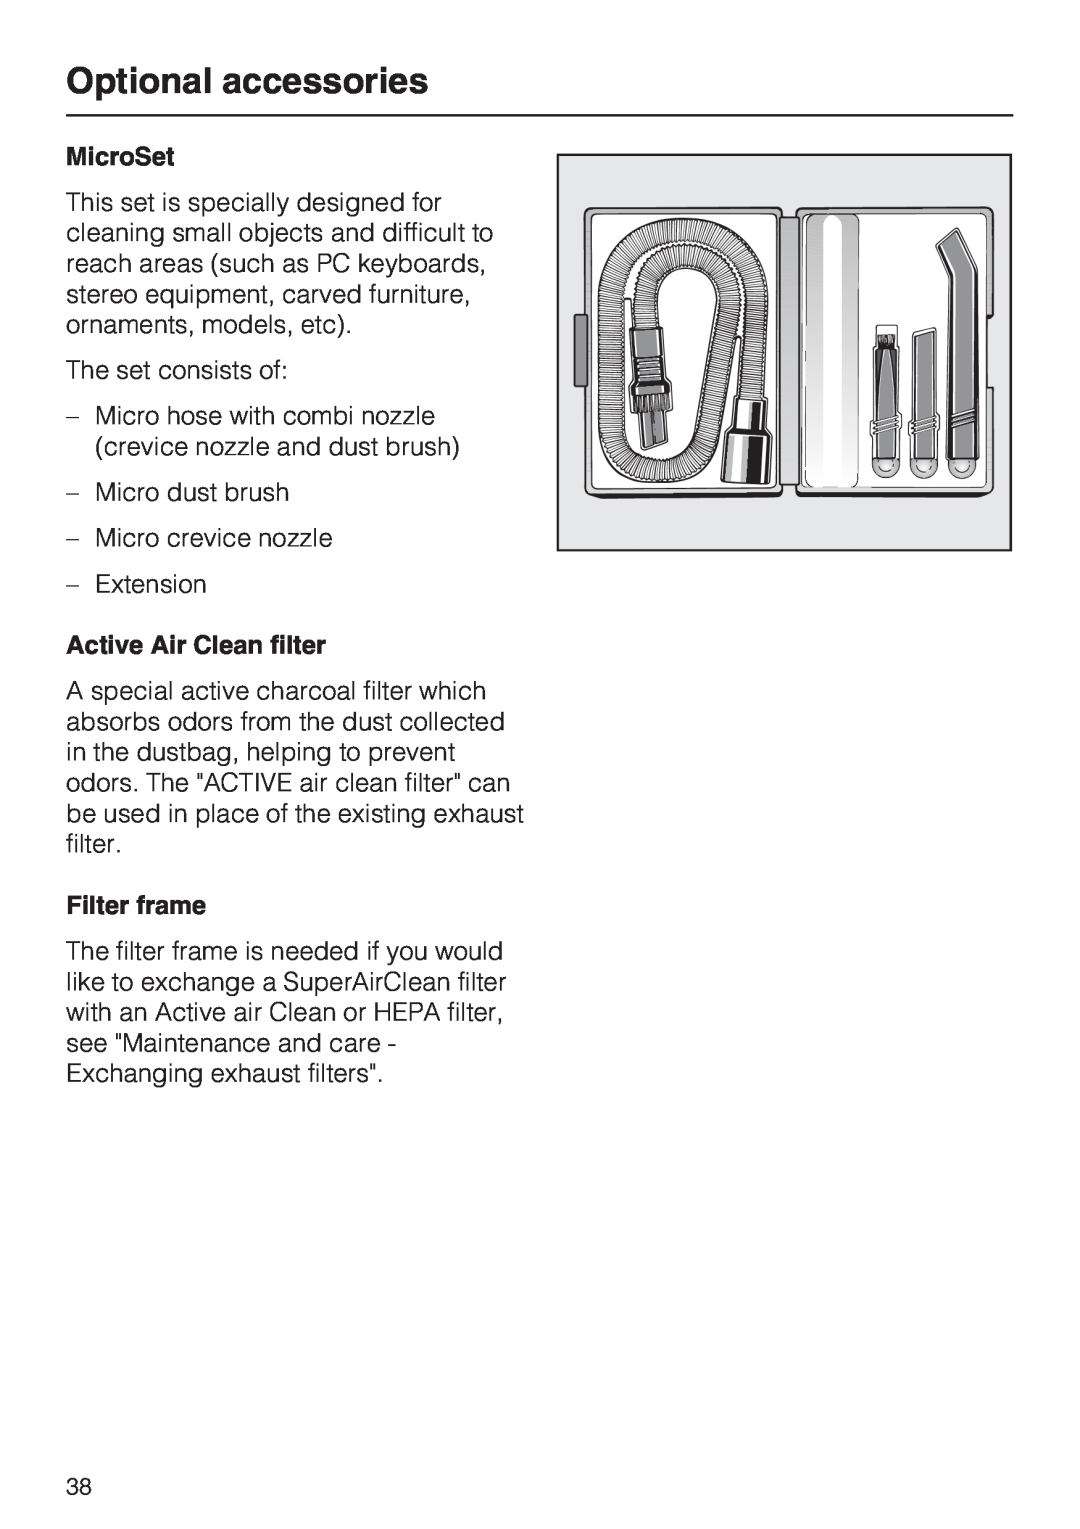 Miele S 5980 operating instructions Optional accessories, MicroSet, Active Air Clean filter, Filter frame 